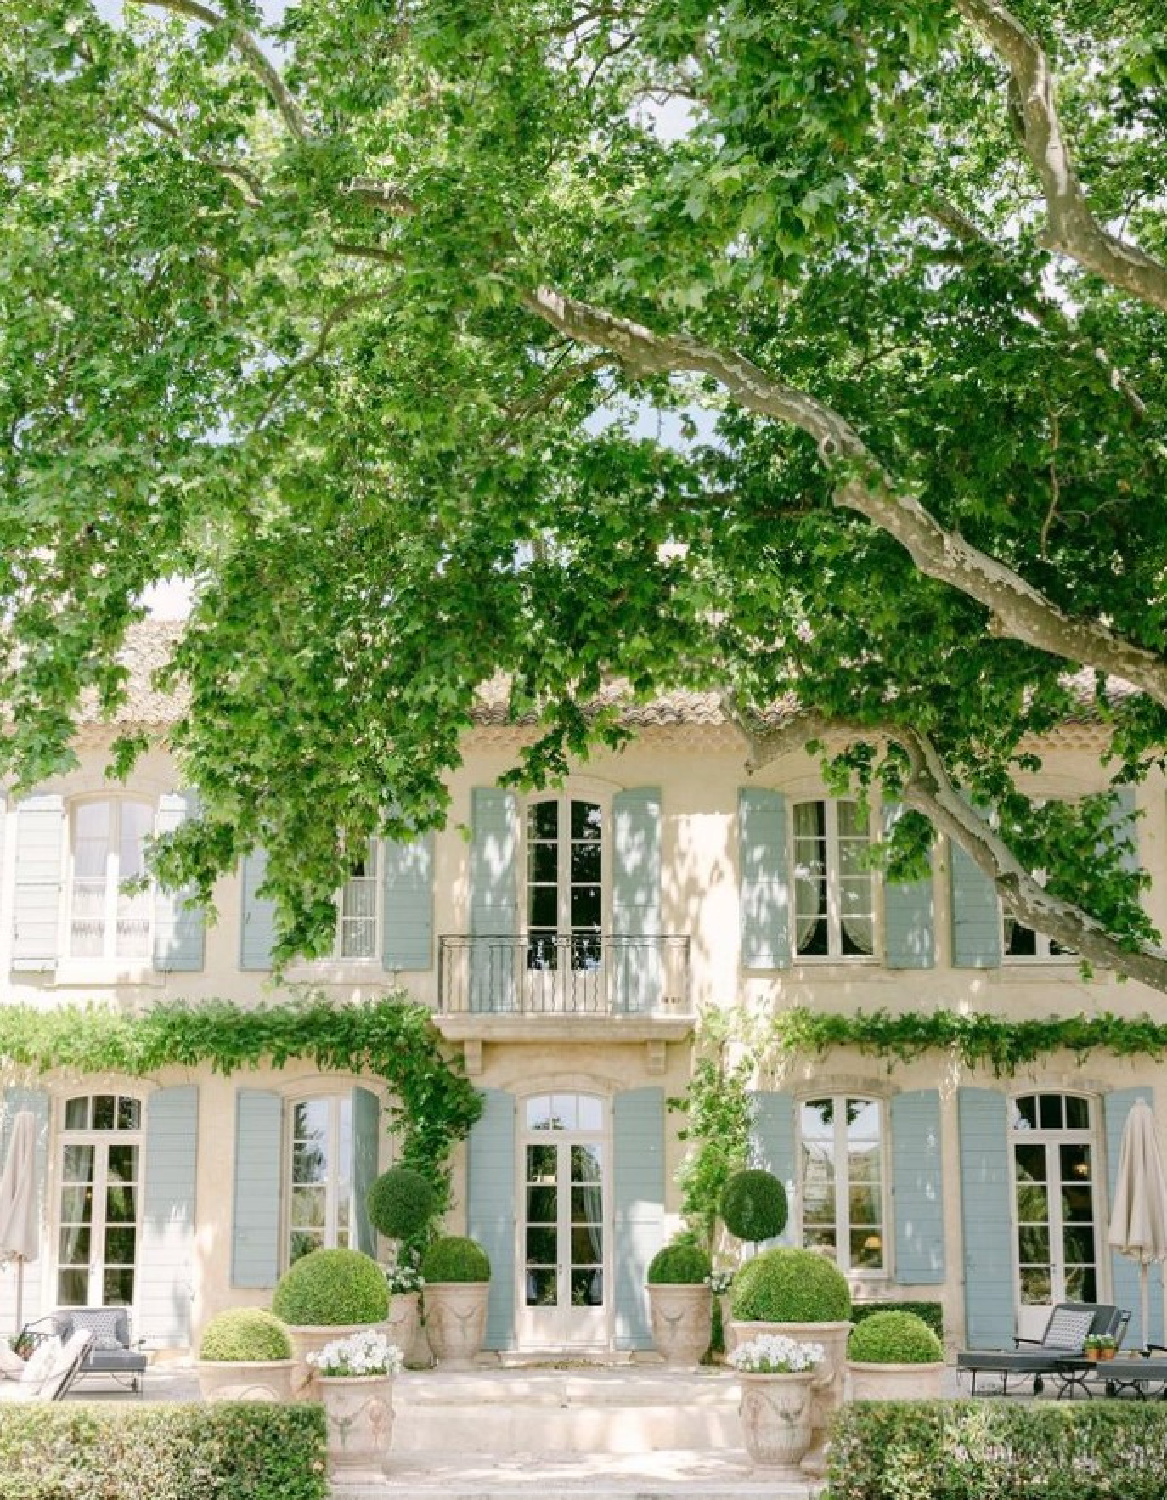 Provence Poiriers - photo by @brunorezza - a lovely Provencal French farmhouse with shutters, topiaries, and breathtaking gardens. #provencepoiriers